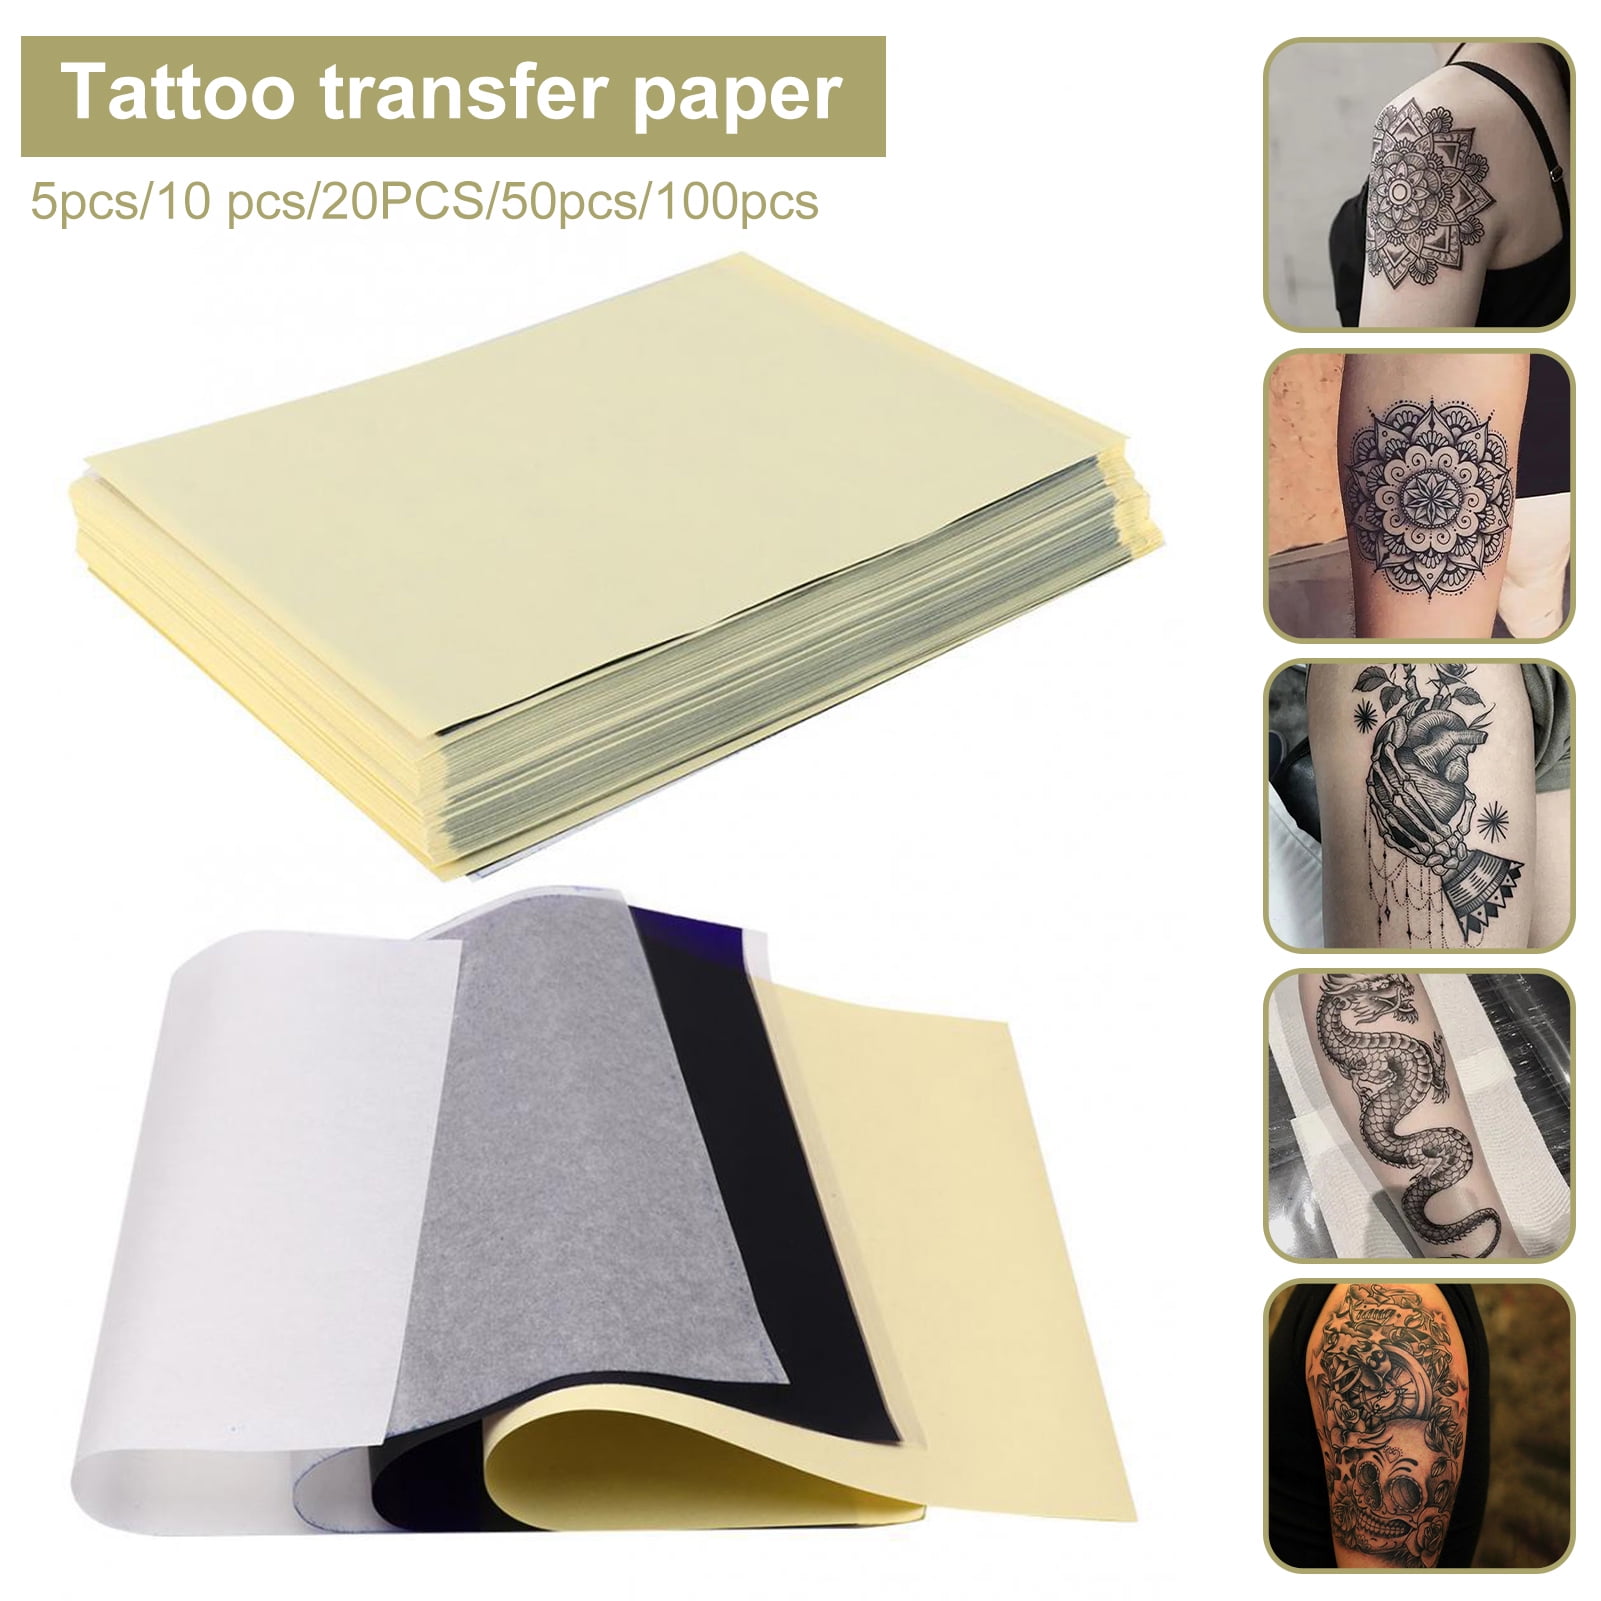 Zruodwans 1 Pack Tattoo Transfer Paper for Tattooing to skin, Tattoo  Stencil Paper for Tattooing Thermal Stencil Diy, A4 Size